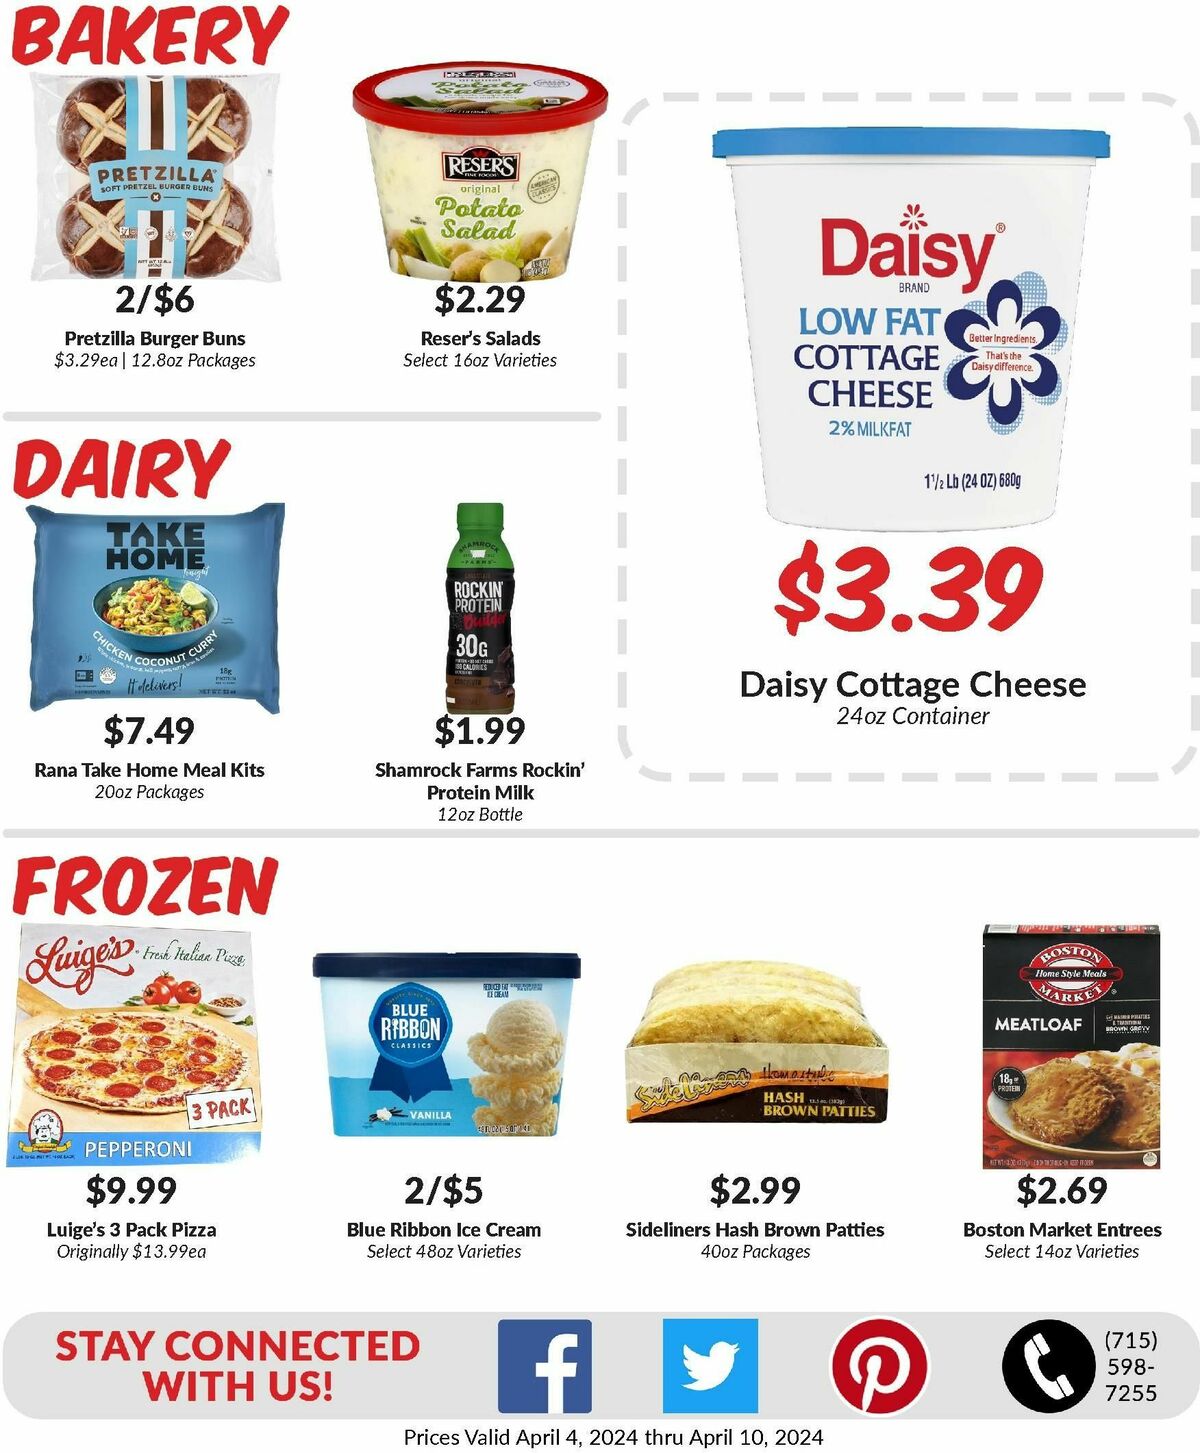 Woodmans Food Market Weekly Ad from April 4